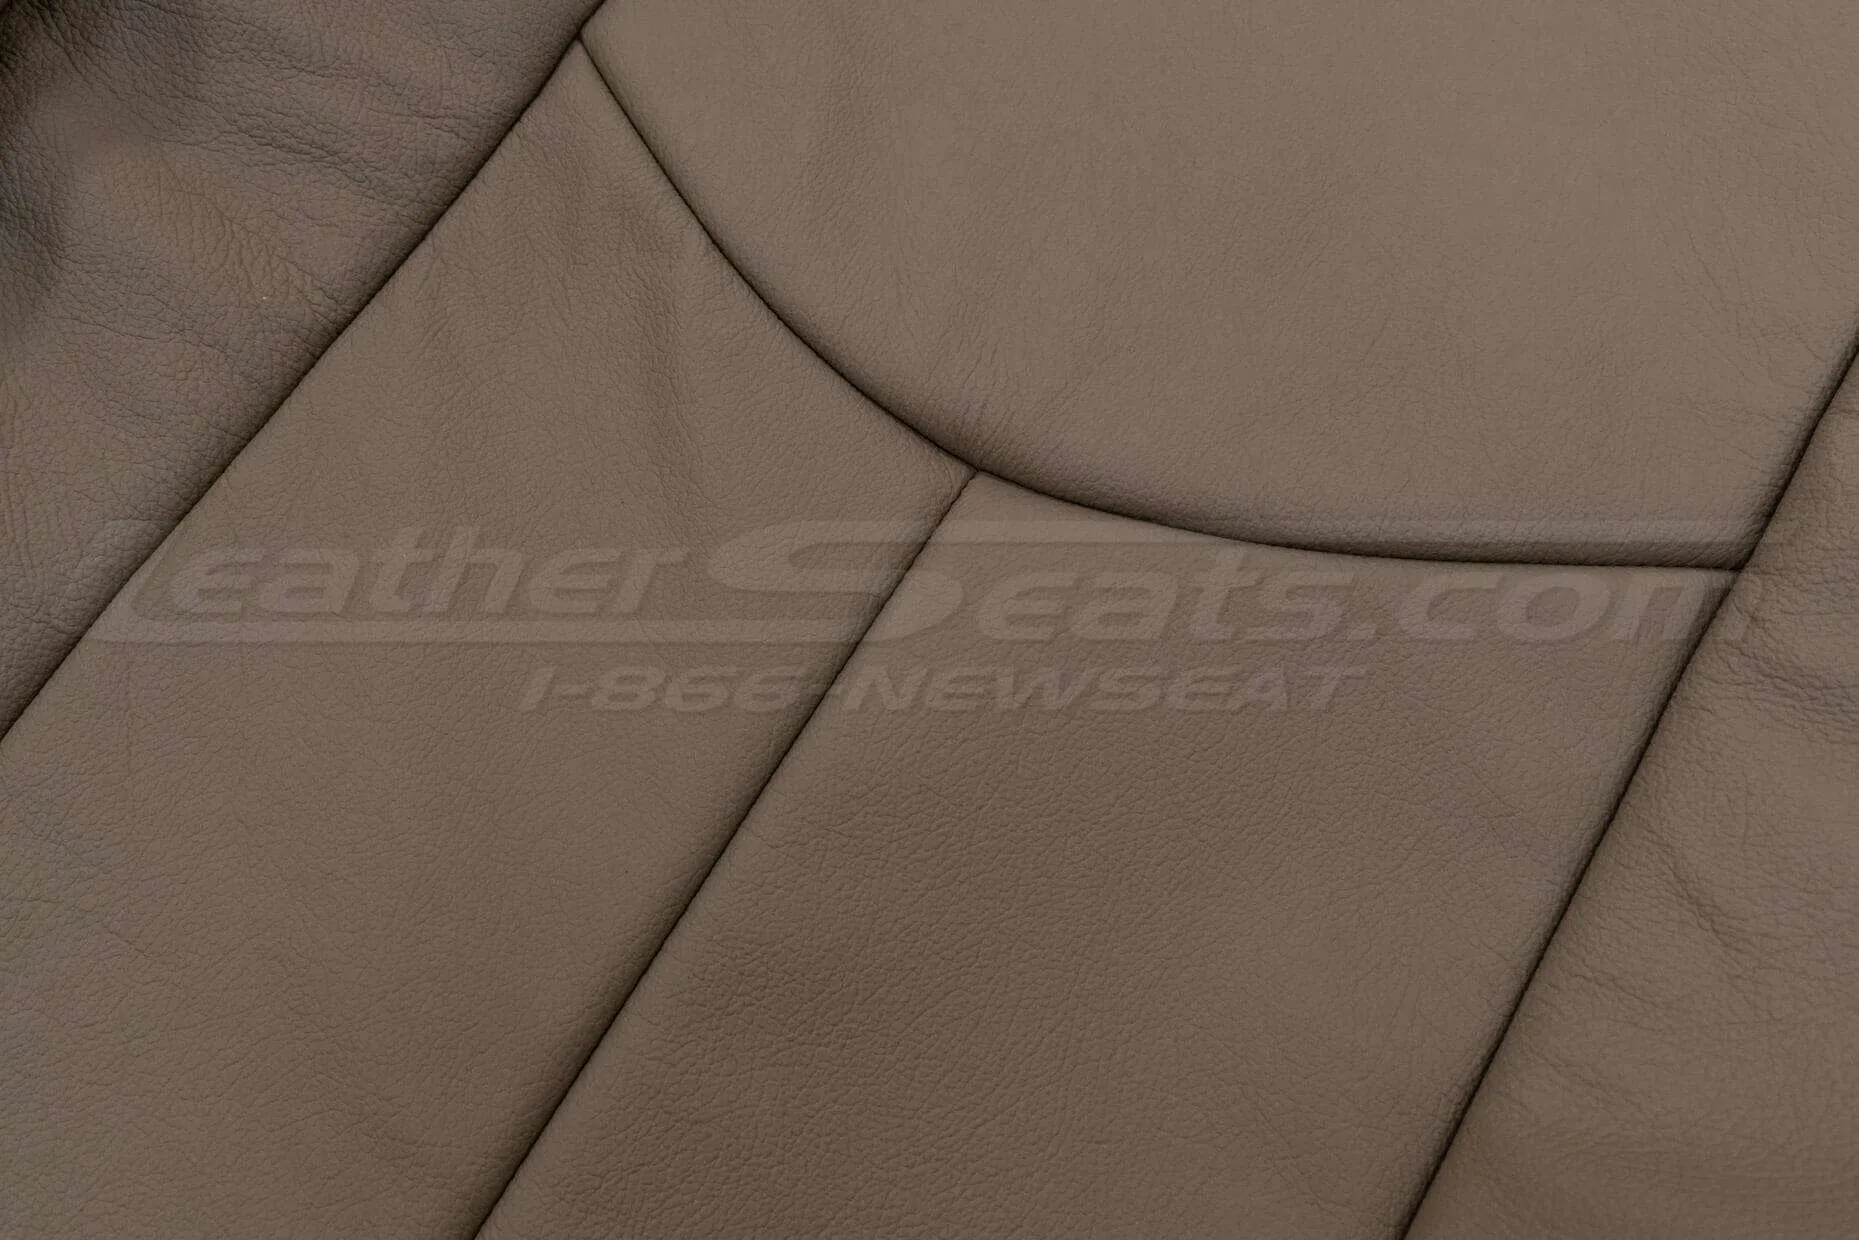 Leather texture of backrest